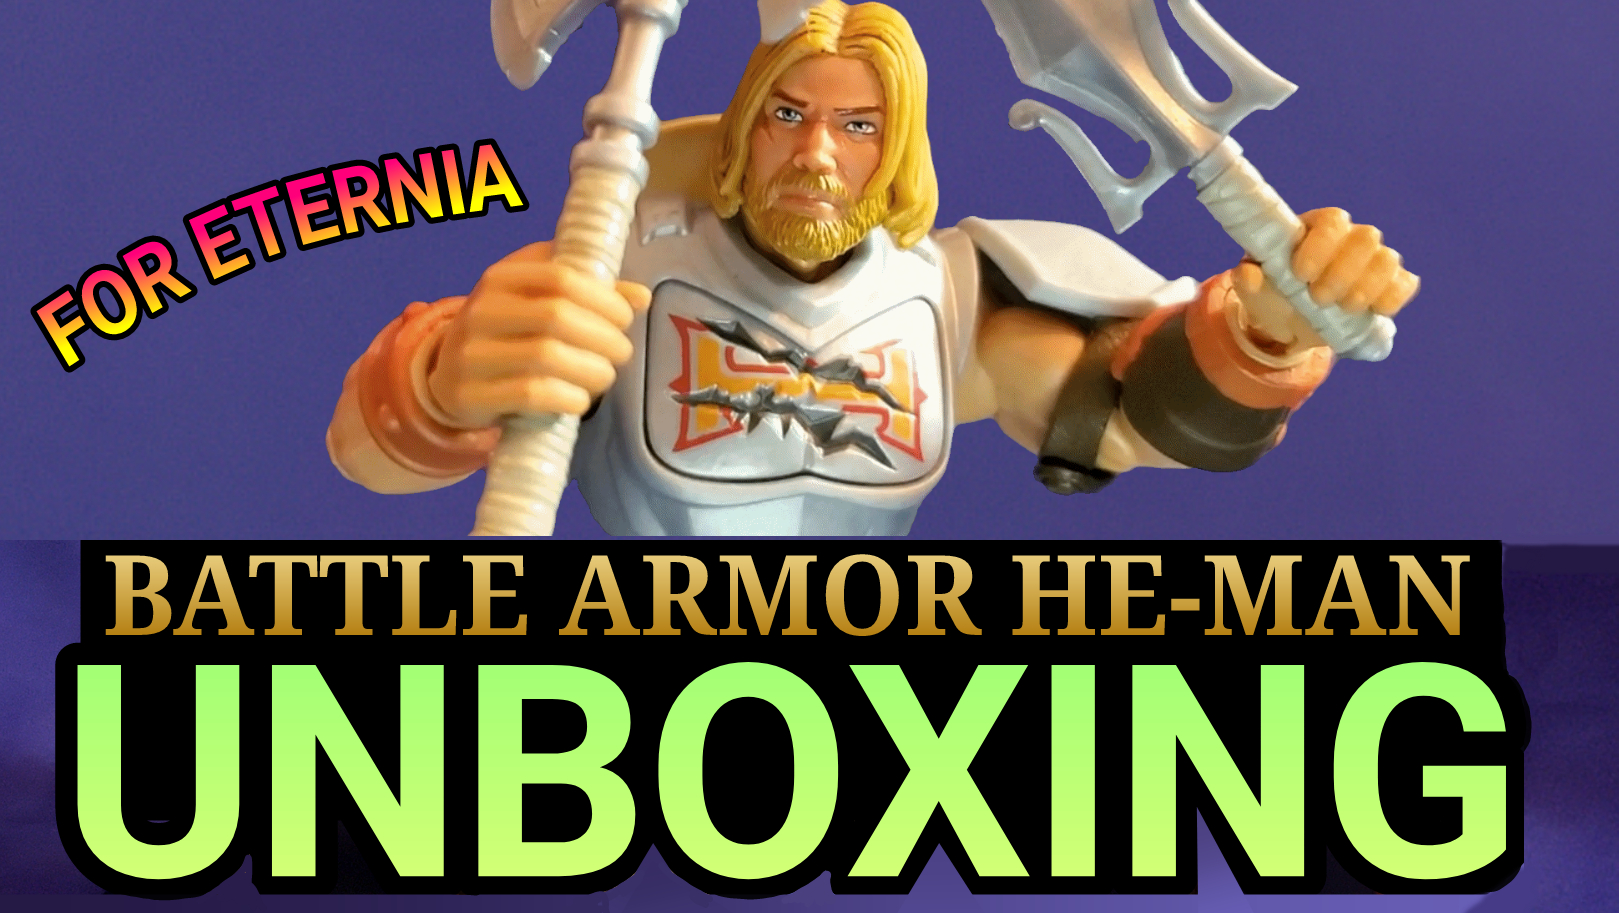 Watch our Masterverse New Eternia BATTLE ARMOR HE-MAN Unboxing & Mini Review